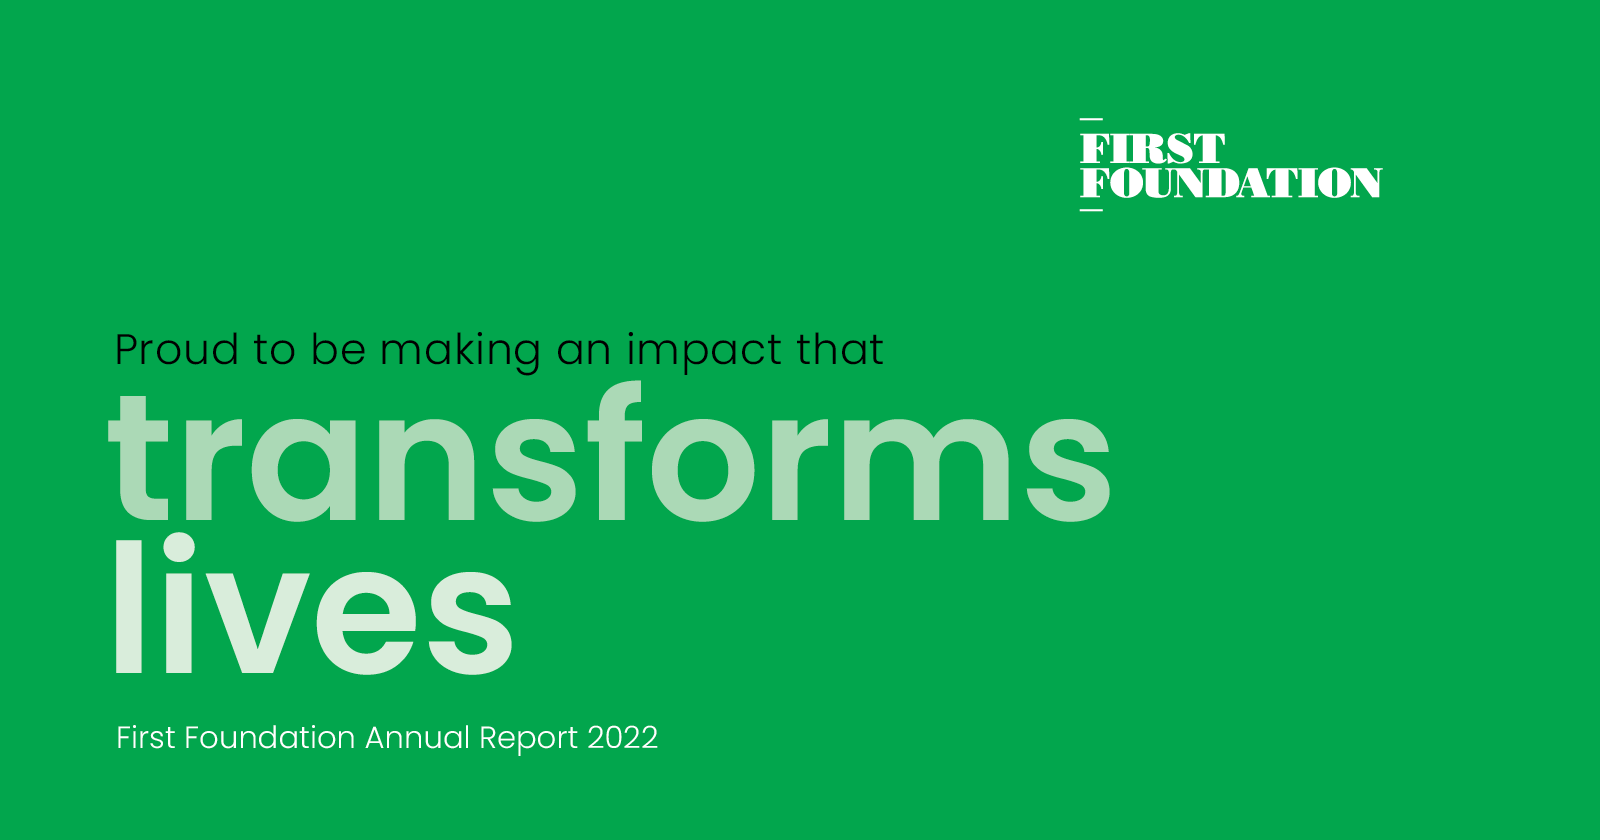 Annual Report 2022 First Foundation - Making an Impact that transforms lives